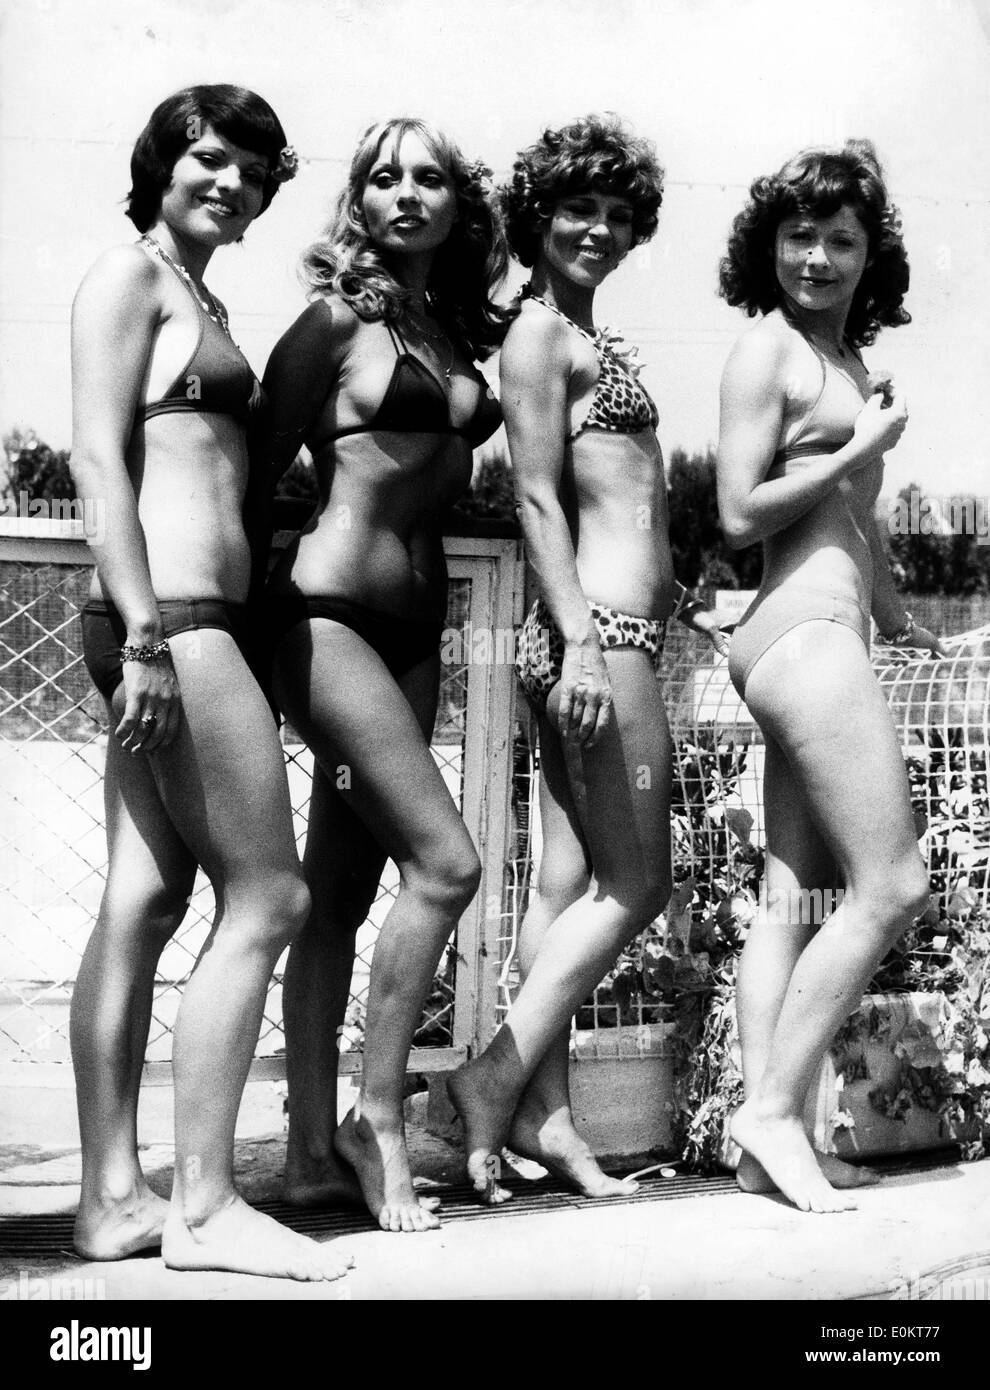 Jan. 01, 1950 - L - File Photo: circa 1940s-1950s, location unknown. Girls posing in bikini's in fashion shows, shoots and on beaches tanning. According to the official version, the modern bikini was invented by French engineer Louis Rekard and fashion designer Jacques Heim in Paris in 1946 and introduced on July 5 at a fashion show at Piscine Molitor in Paris. It was a string bikini with a g-string back Stock Photo